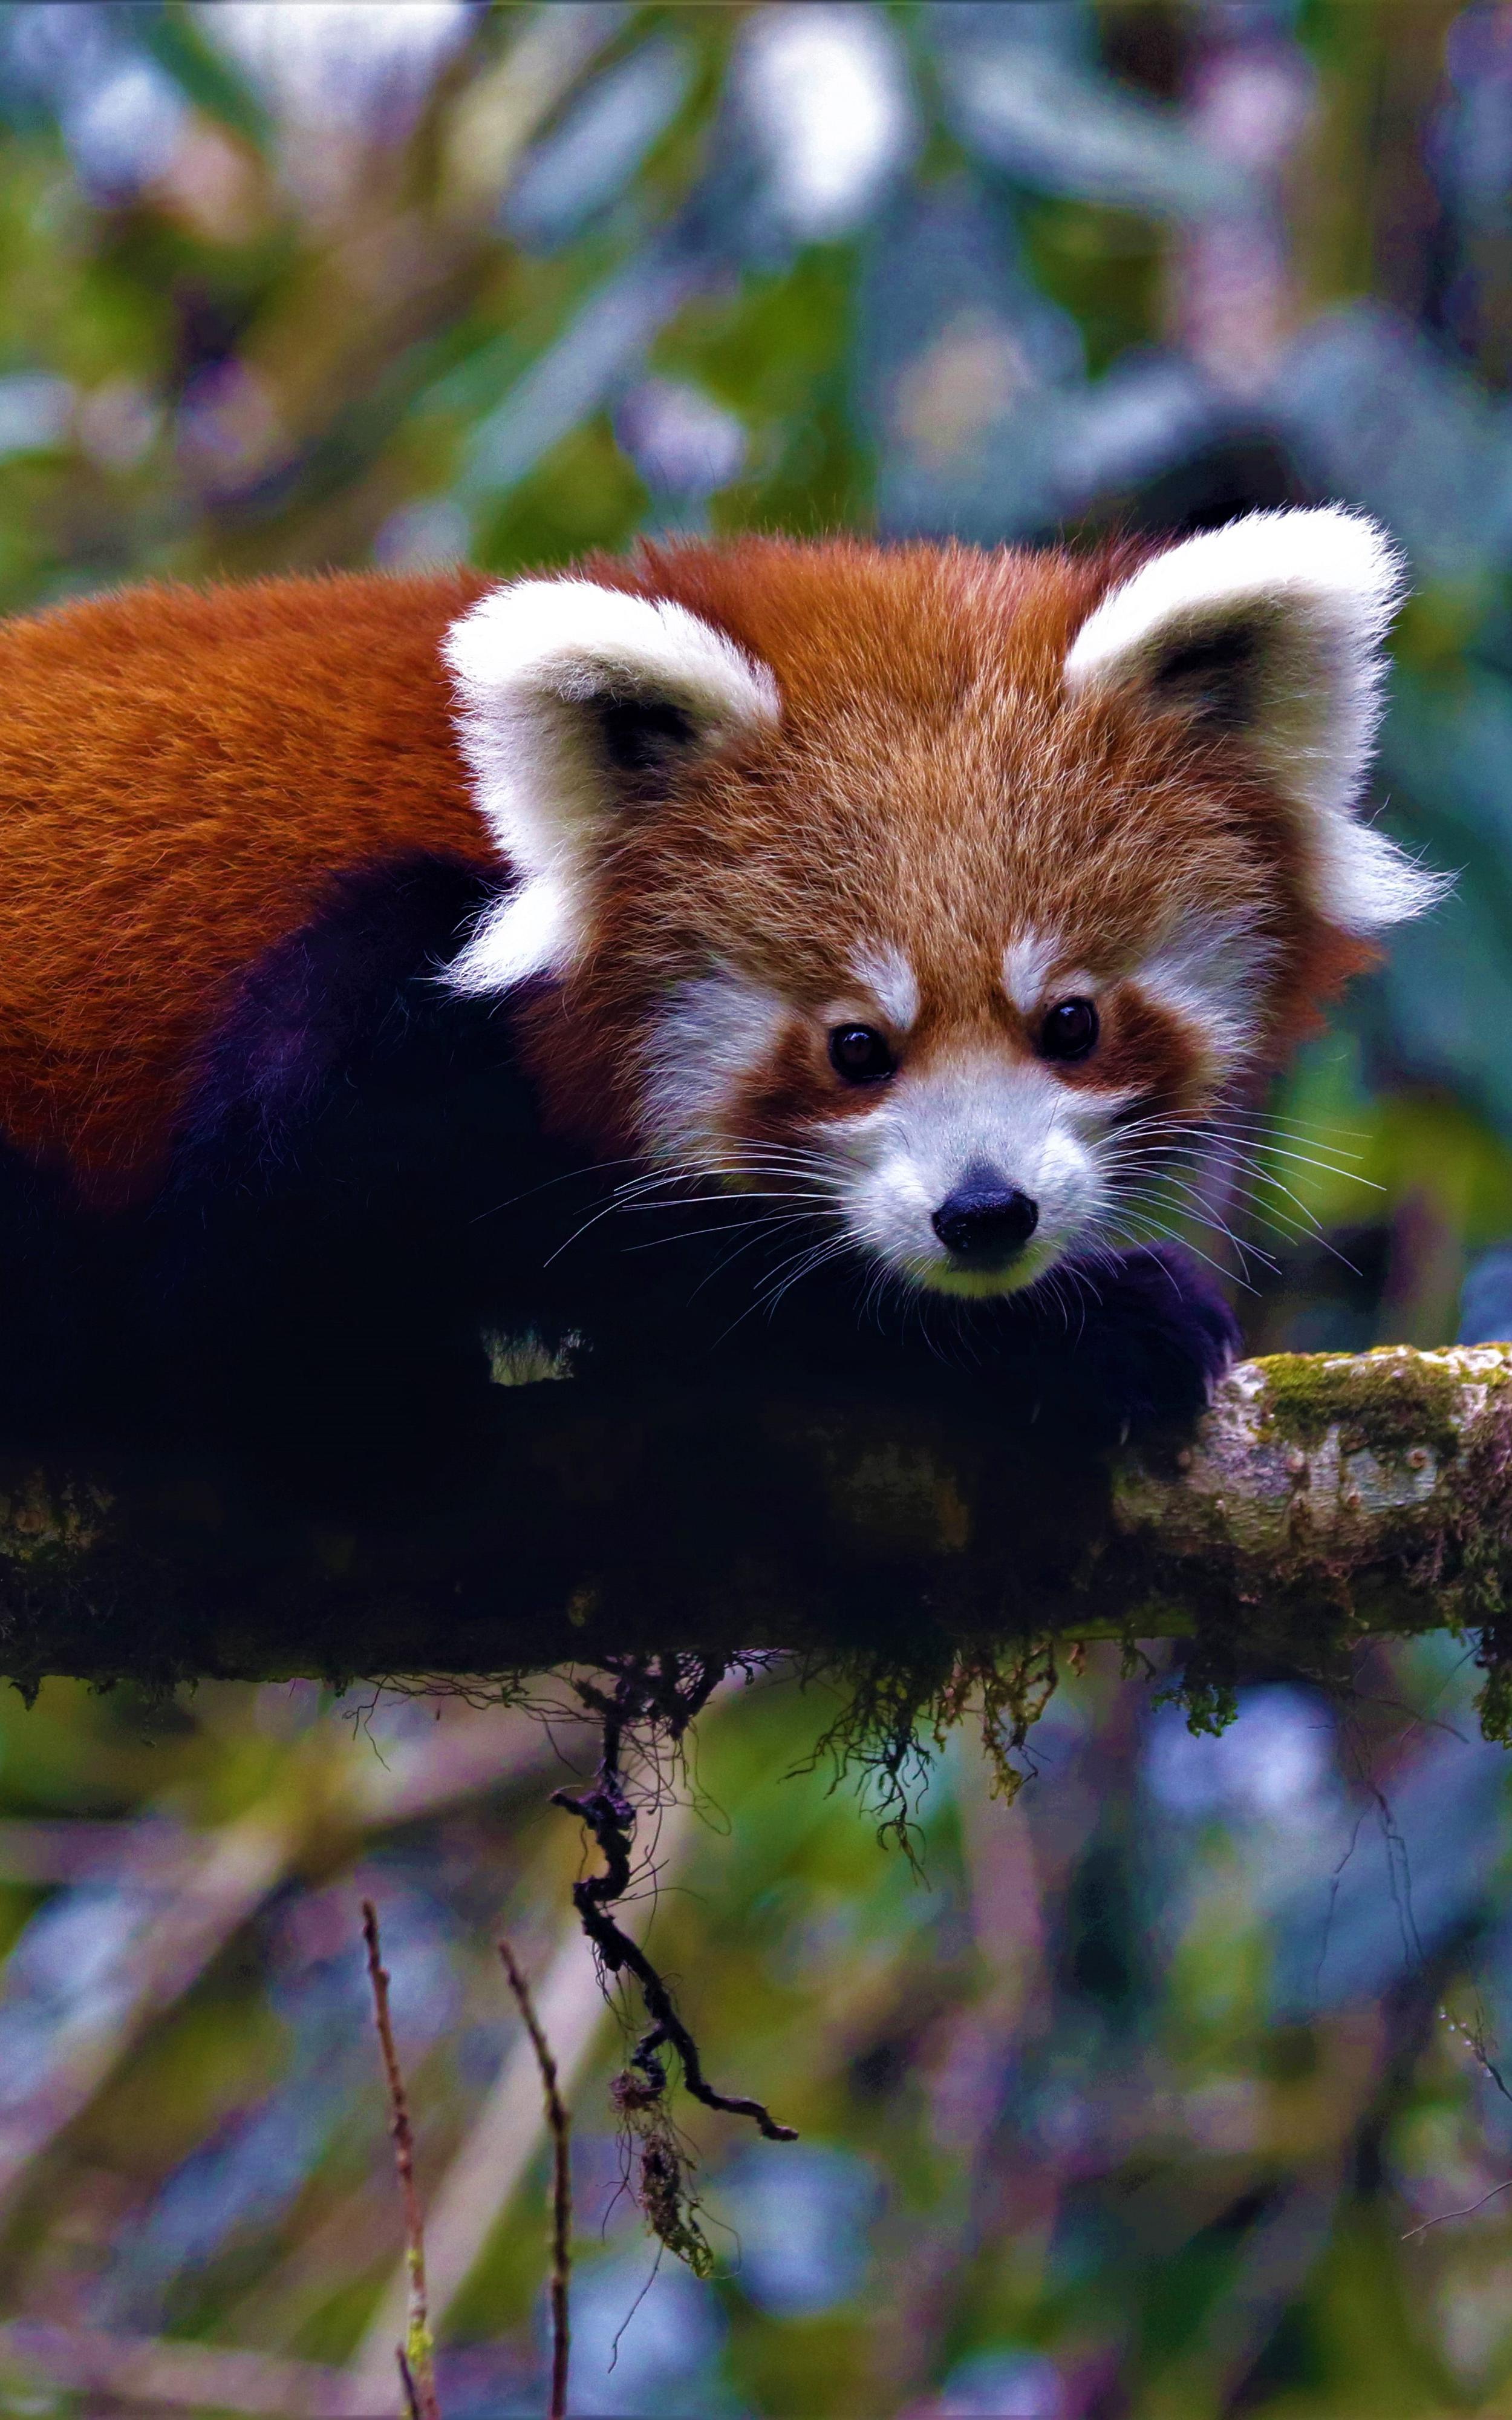 Beautiful News-Red panda perched on a tree branch